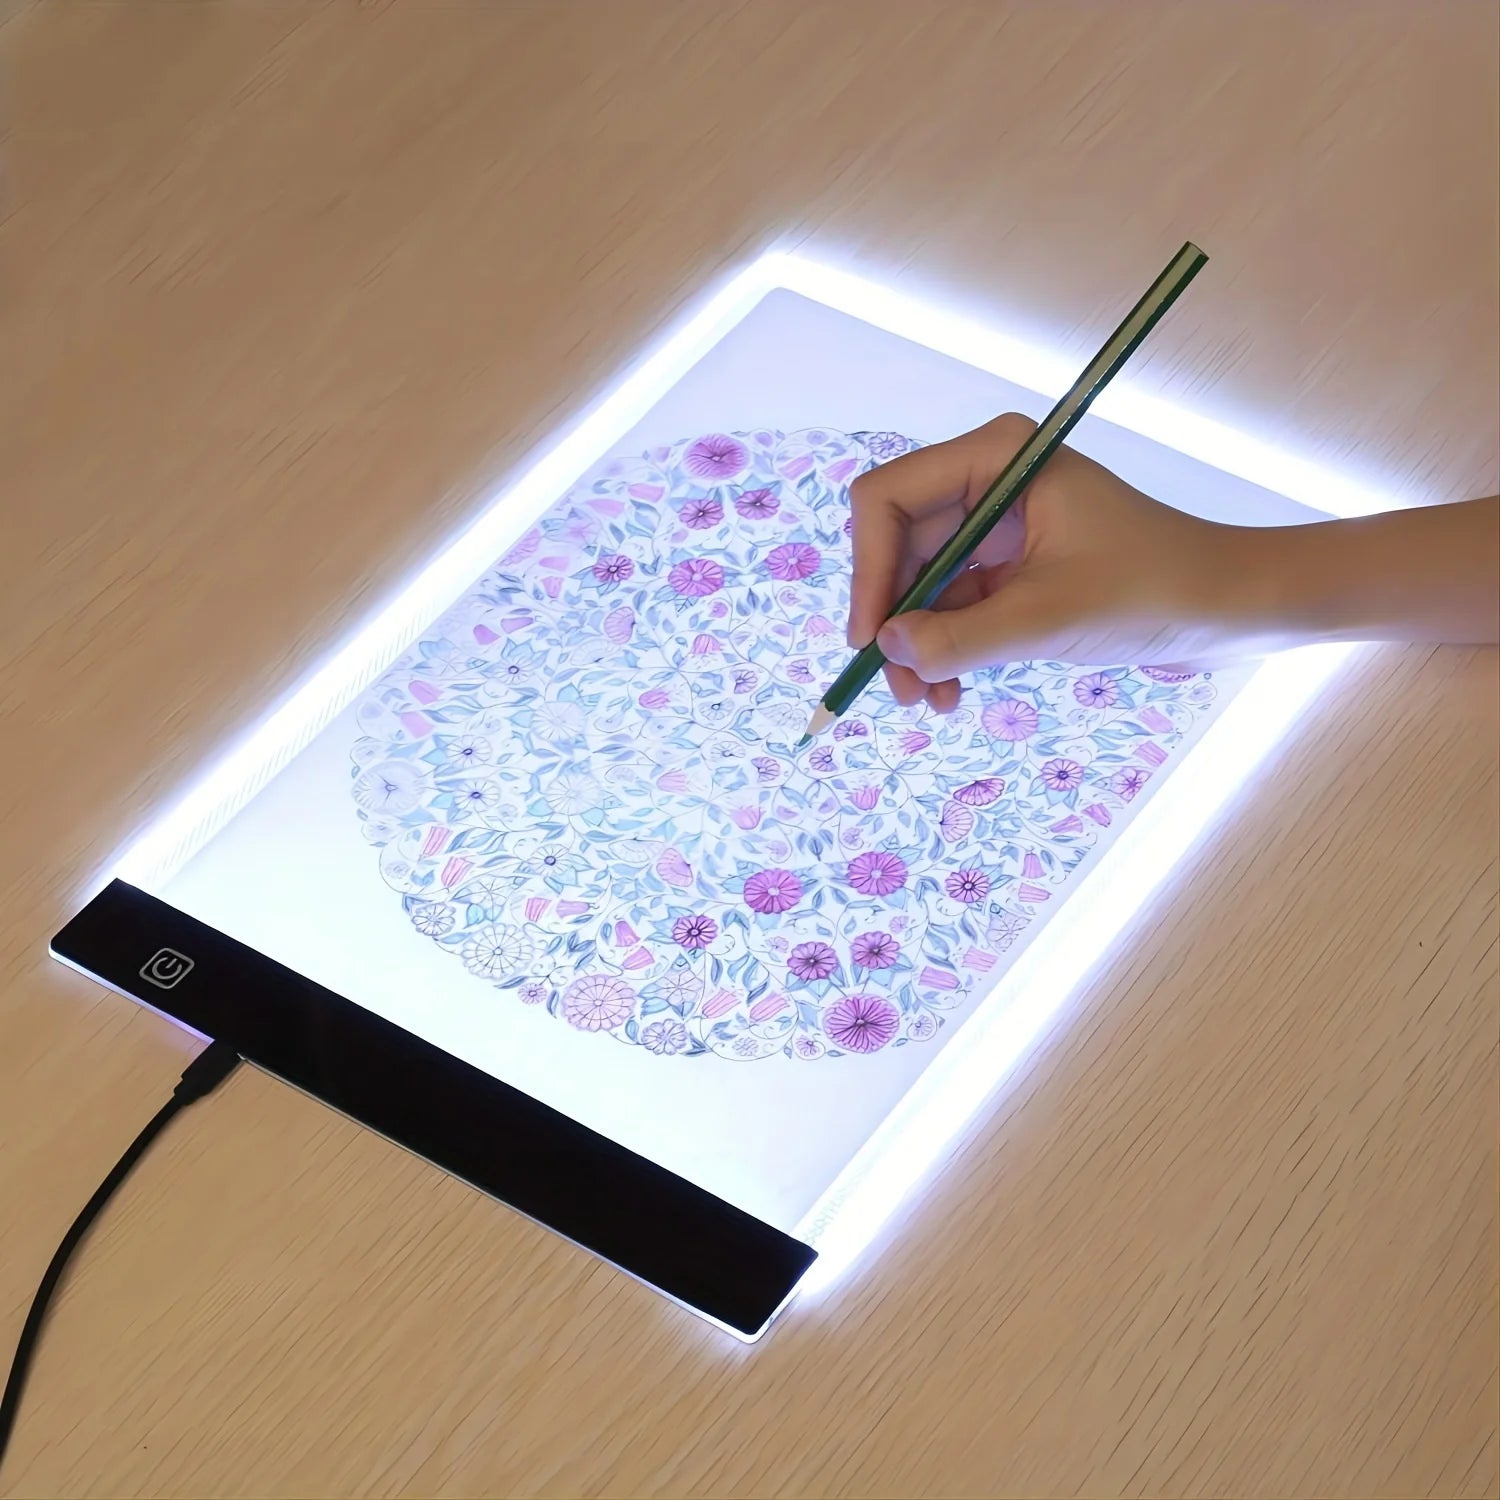 Dimmable LED Drawing Copy Pad